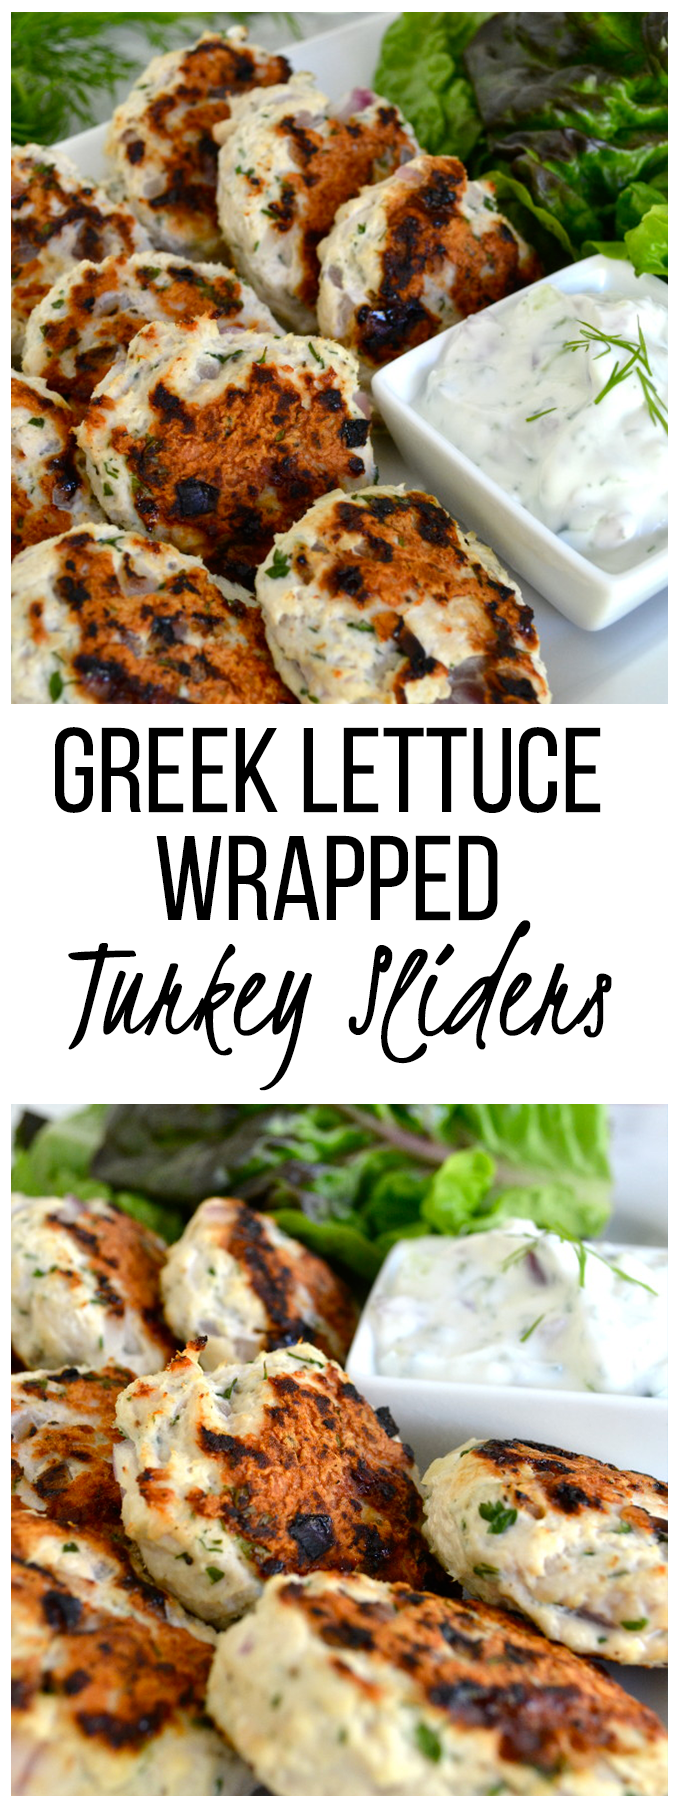 Greek Lettuce Wrapped Turkey Sliders // A quick and healthy dinner or appetizer for any occasion! 